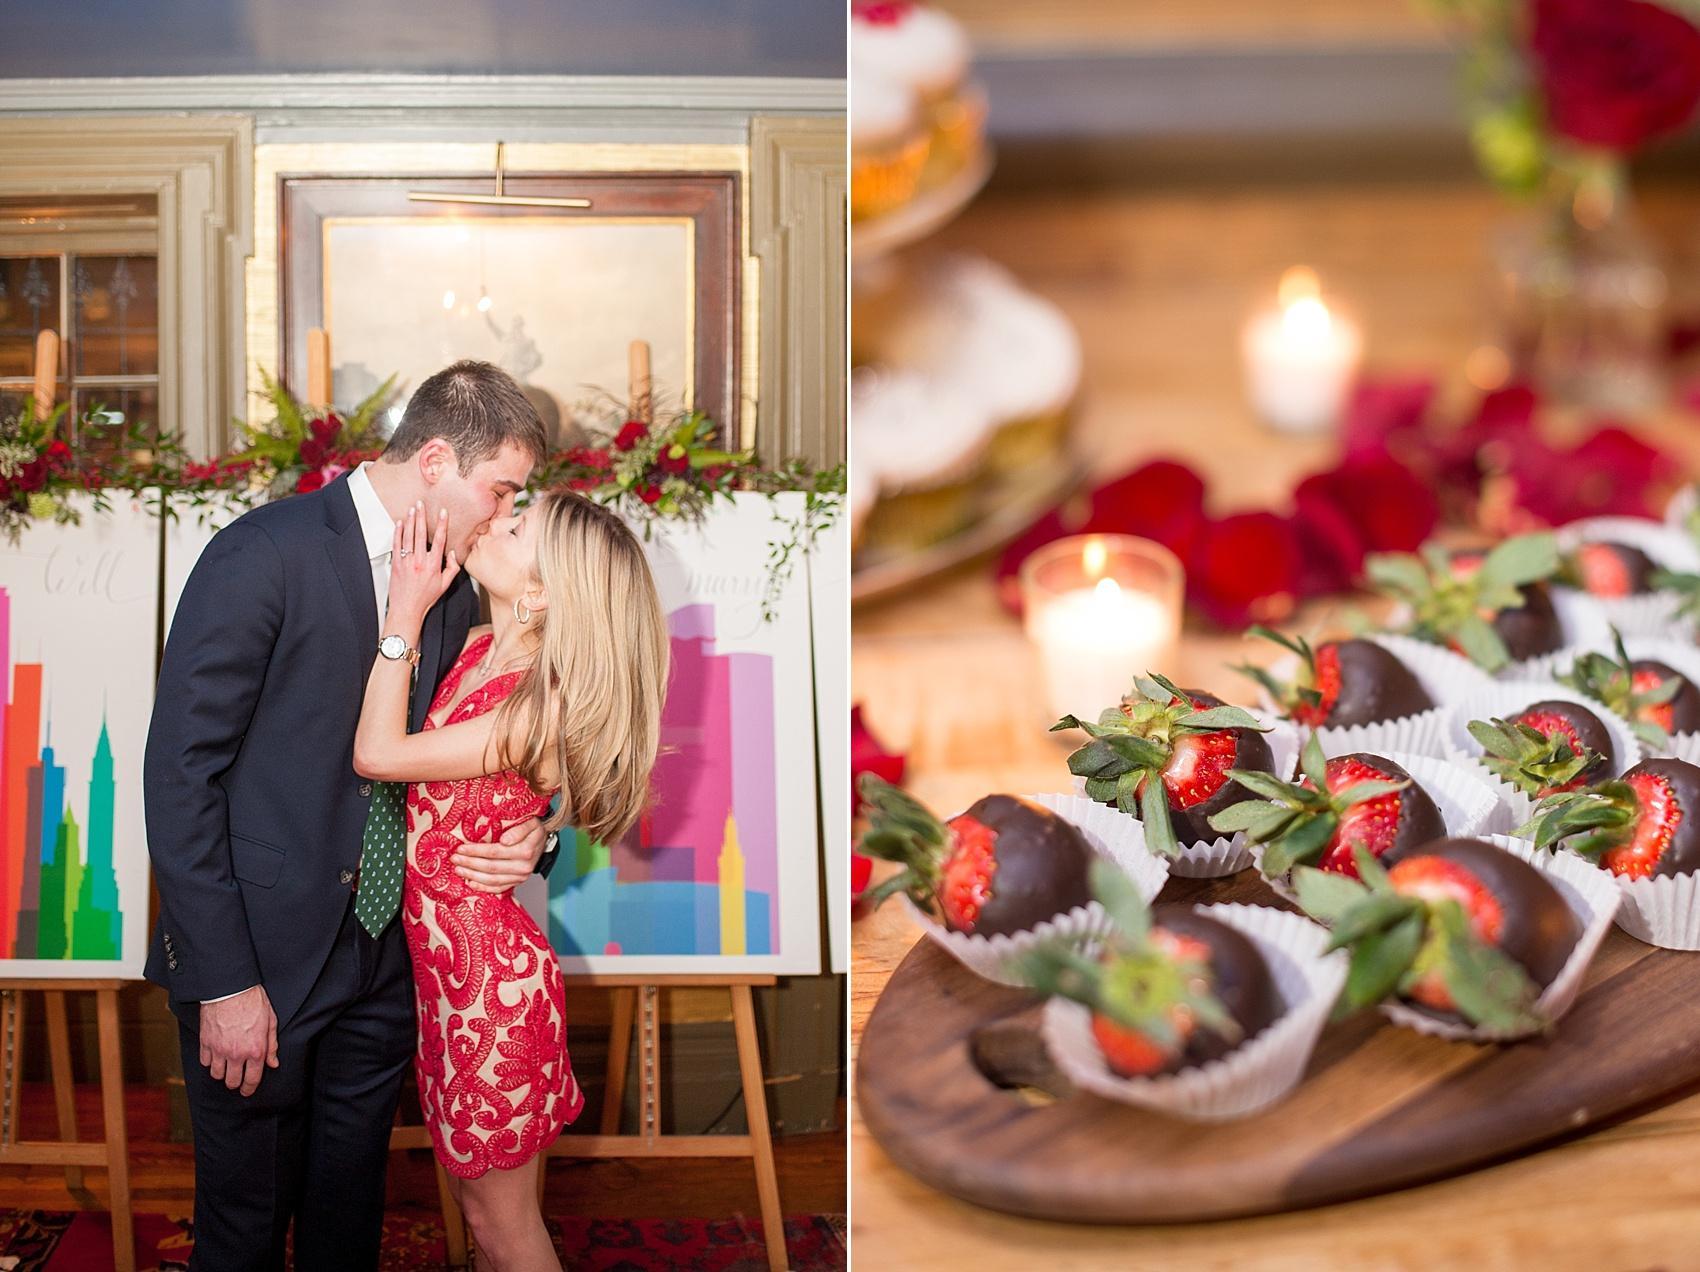 NYC proposal ideas with chocolate strawberries. Photos by Mikkel Paige Photography. Planning by Brilliant Event Planning and flowers by The Arrangement.